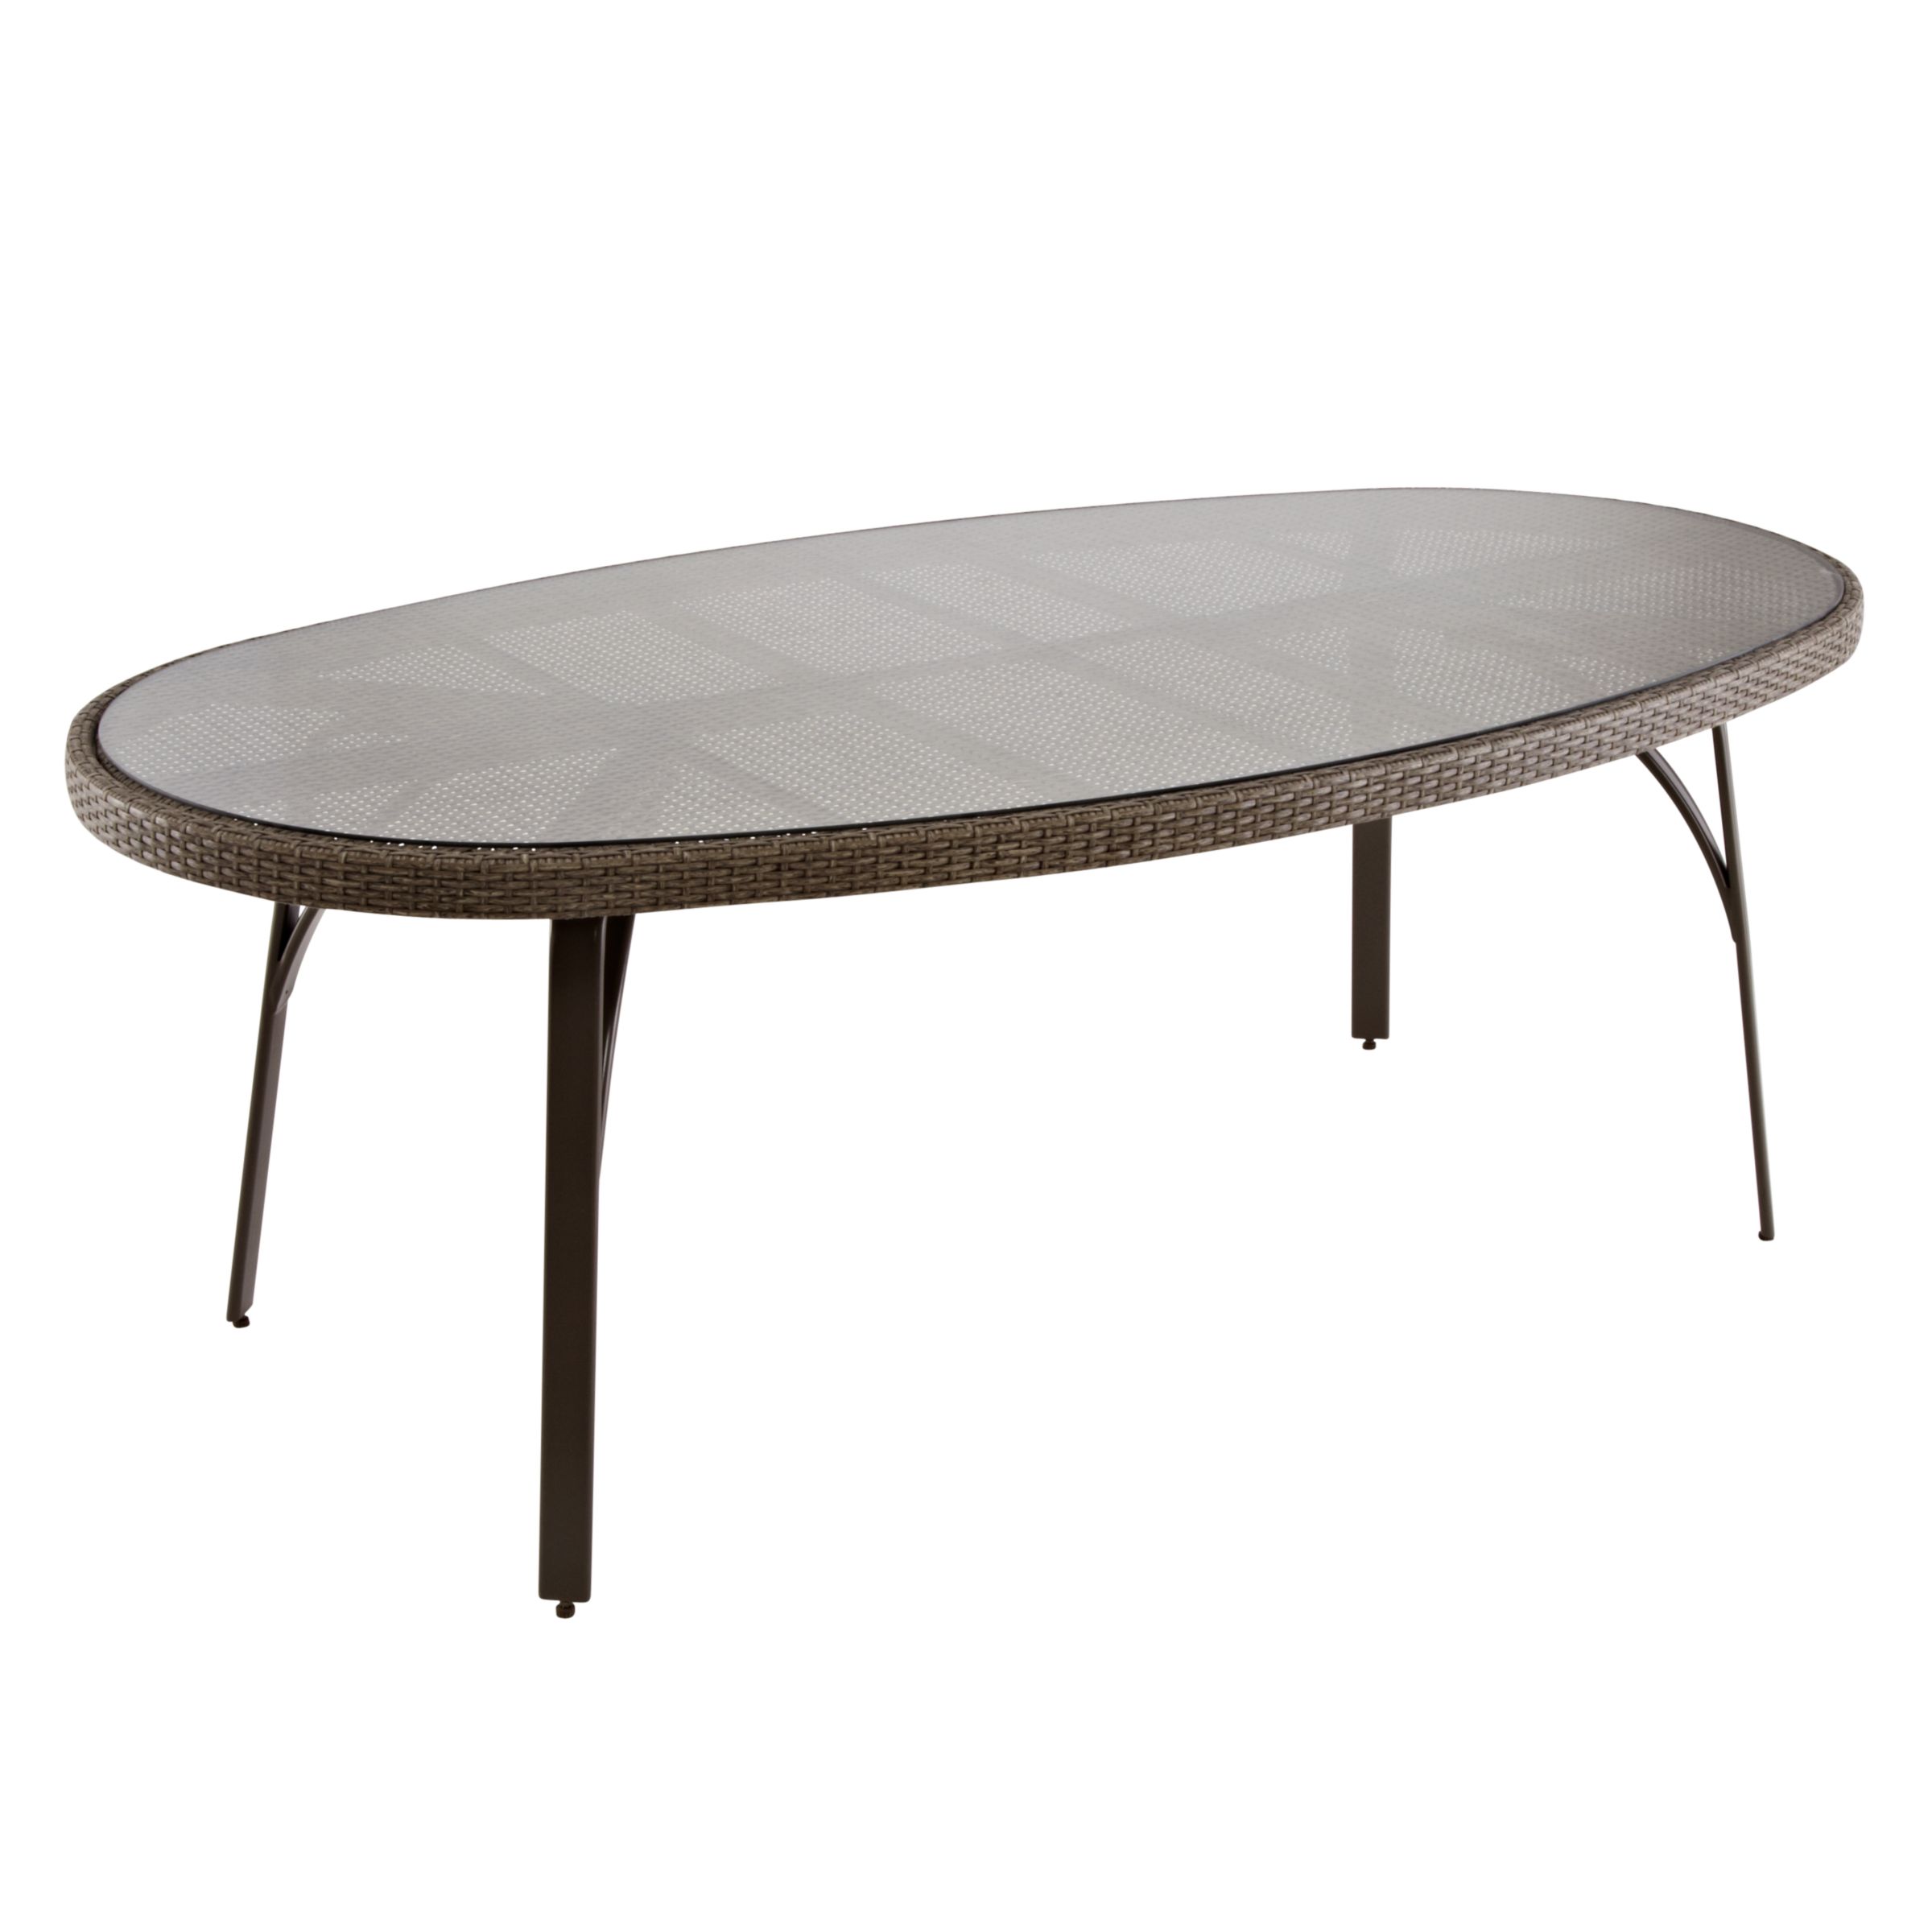 John Lewis Corsica 6 Seater Round Outdoor Dining Table, width 180cm